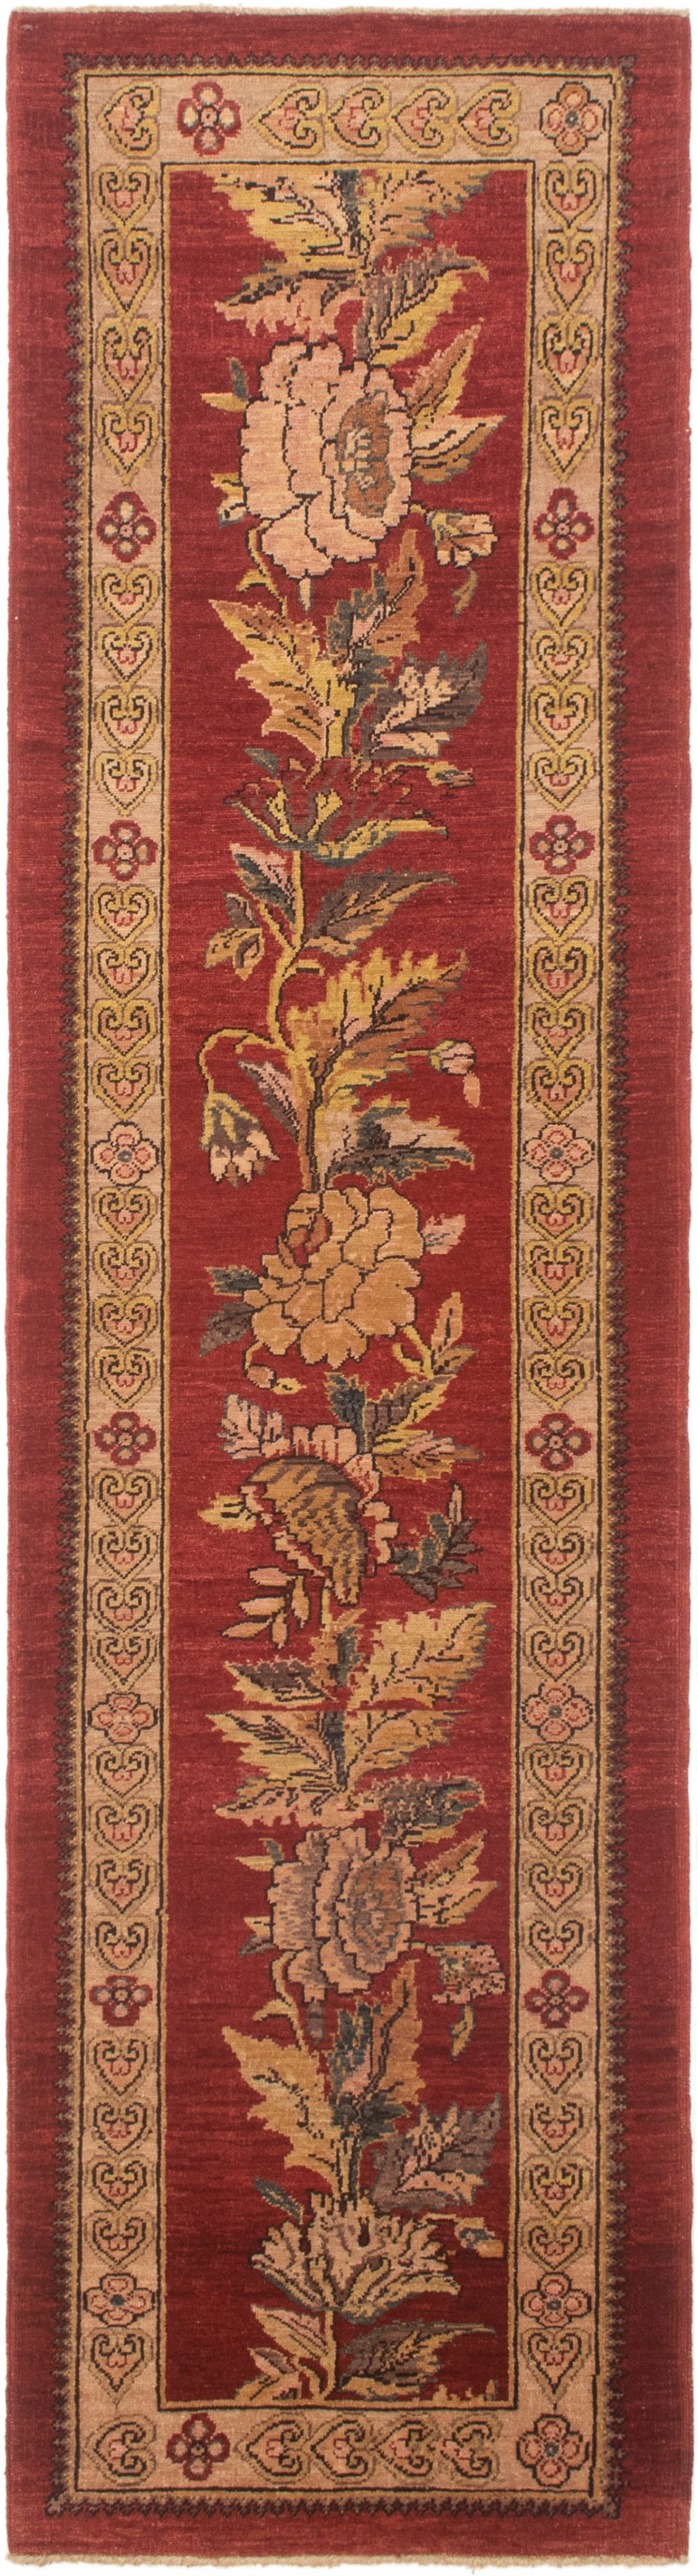 Hand-knotted Finest Ziegler Chobi Red Wool Rug 2'6" x 10'0" Size: 2'6" x 10'0"  